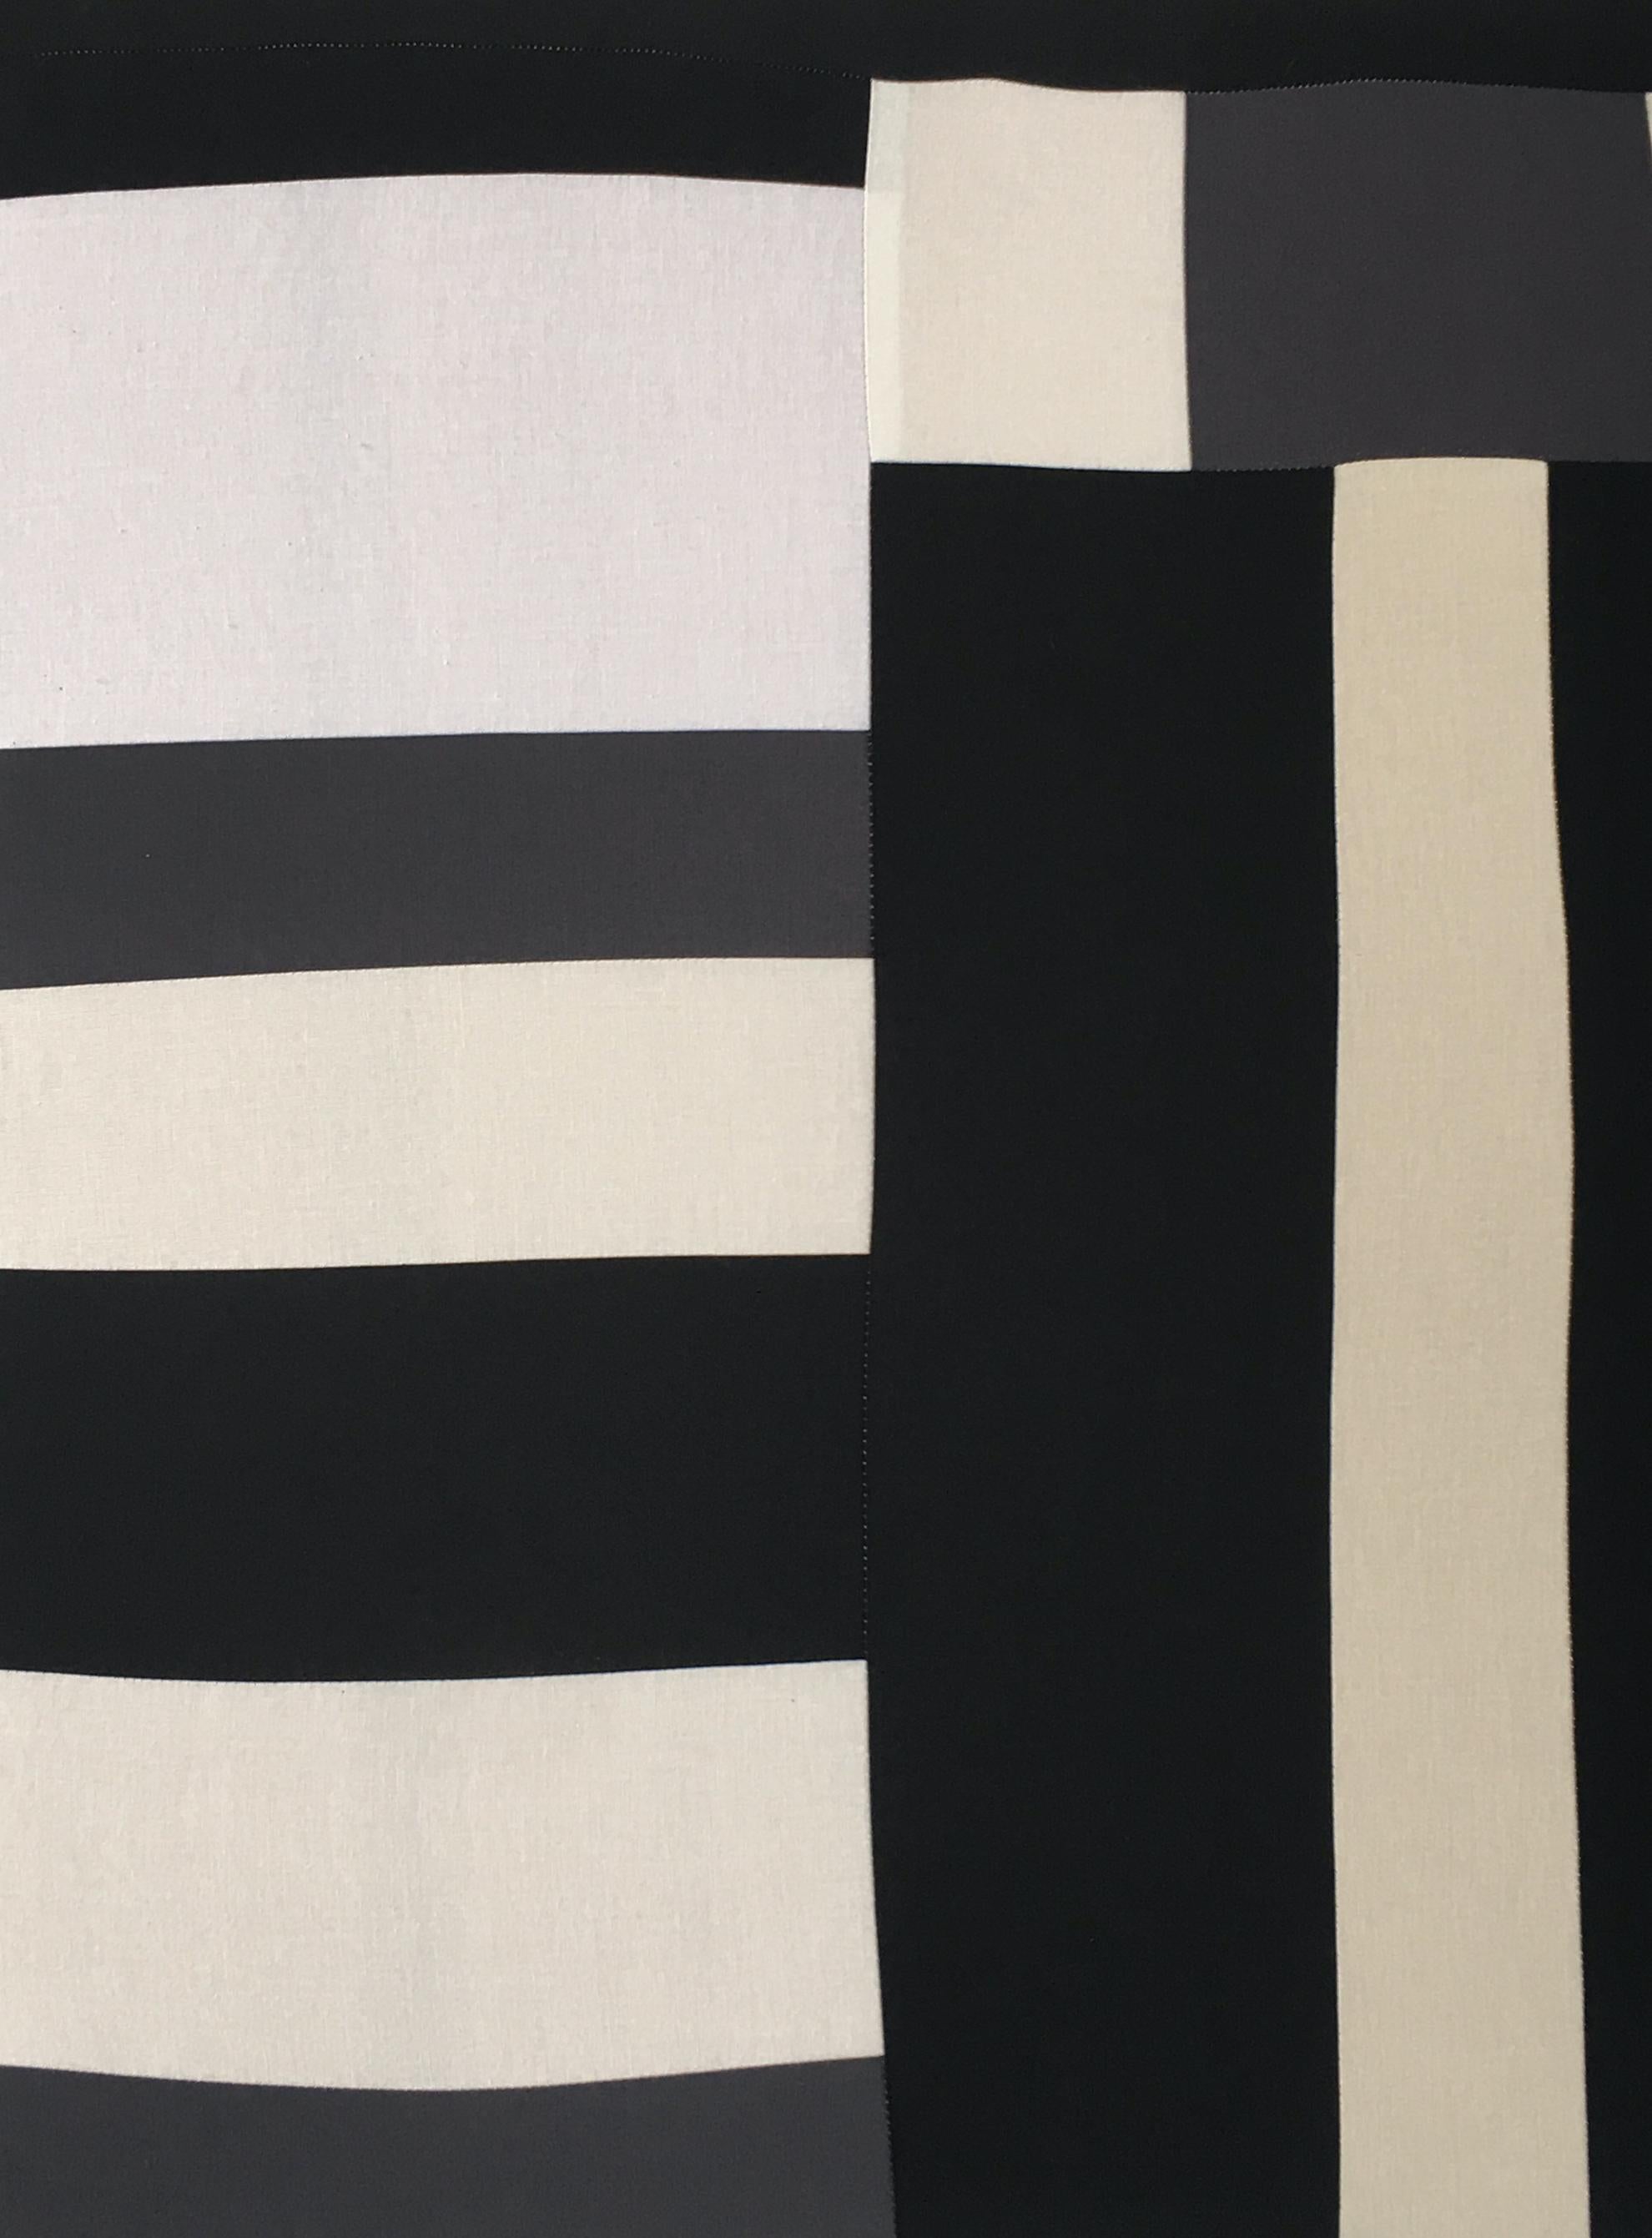 No Spoken Word, textile, cotton, patchwork, geometric abstraction, black, white - Abstract Geometric Mixed Media Art by Heather Jones